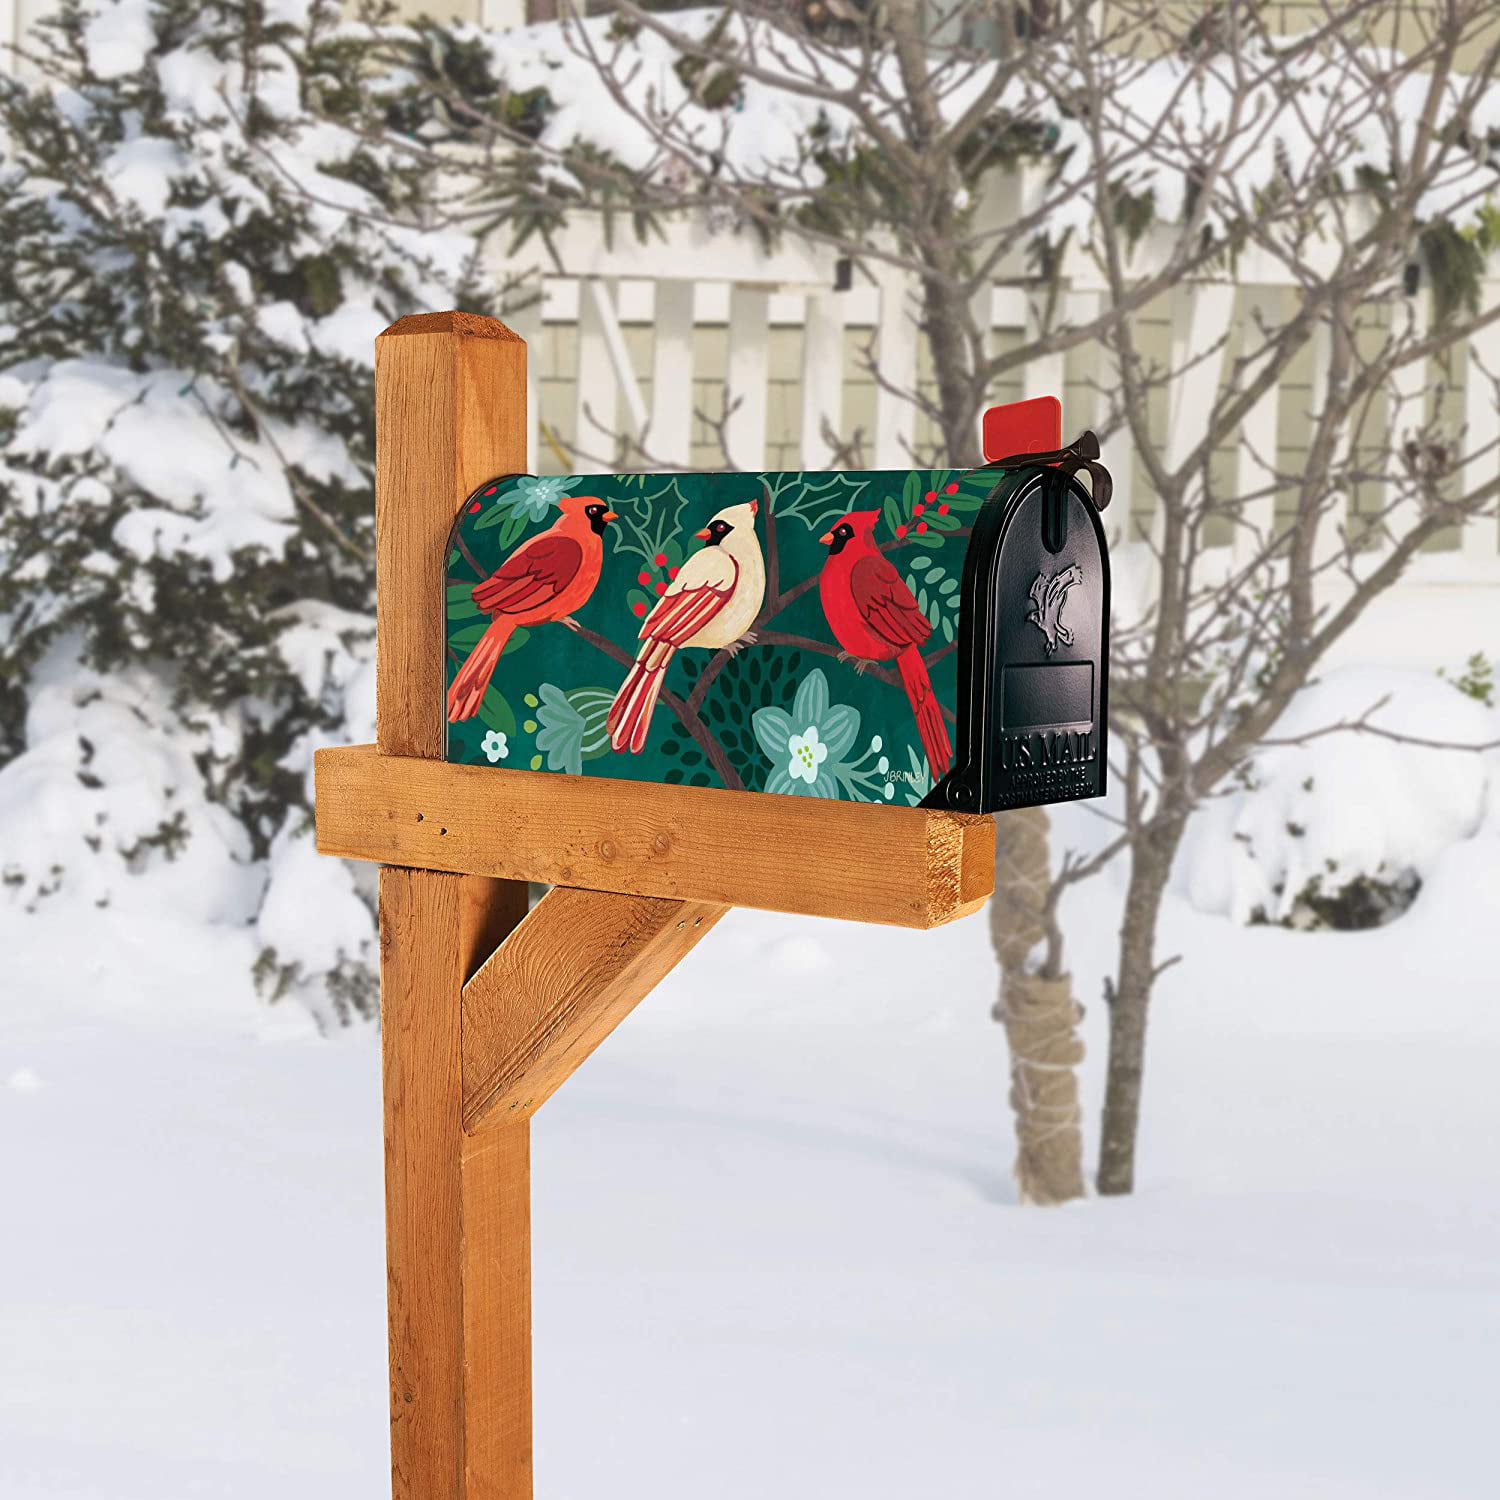 Made in USA Standard Size fits 6.5W x 19L Inch Mailbox Superior Weather Durability The Original Magnetic Mailbox Cover MailWraps Studio M Painted Watering Can Decorative Spring Summer Birds